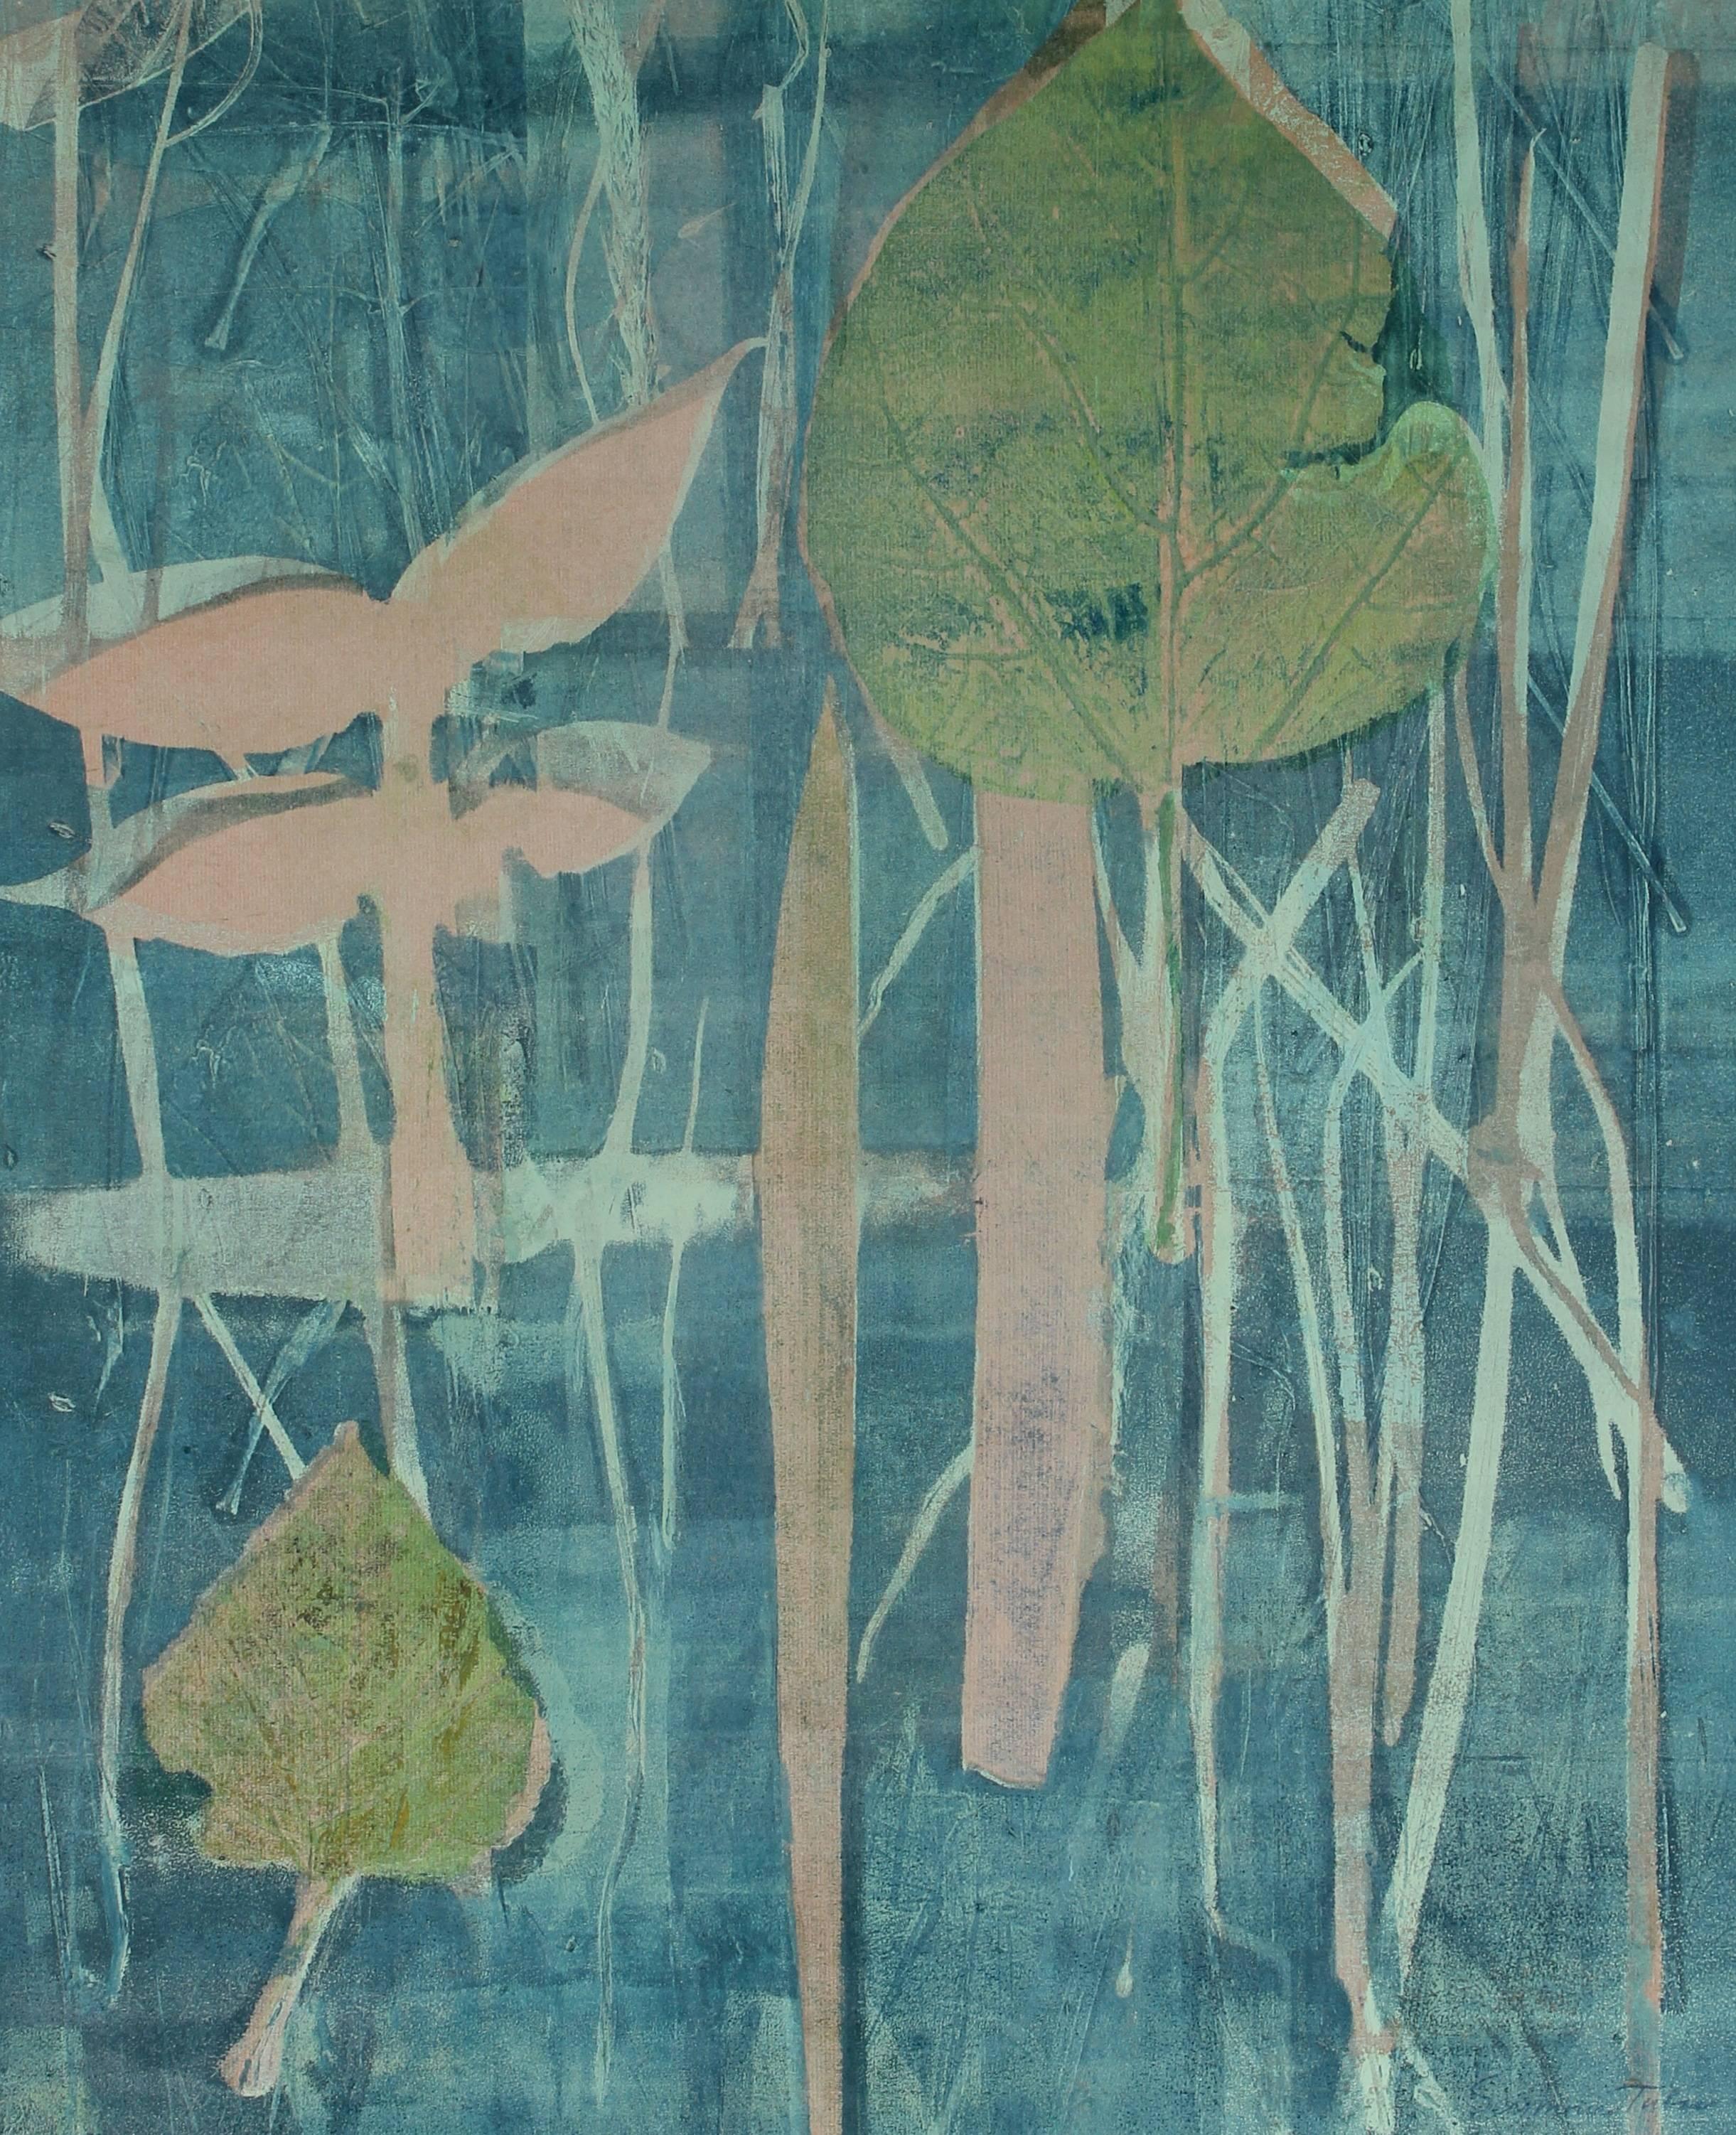 Seymour Tubis Landscape Print - "June" Mixed Media Abstract Print with Leaves, Circa 1971